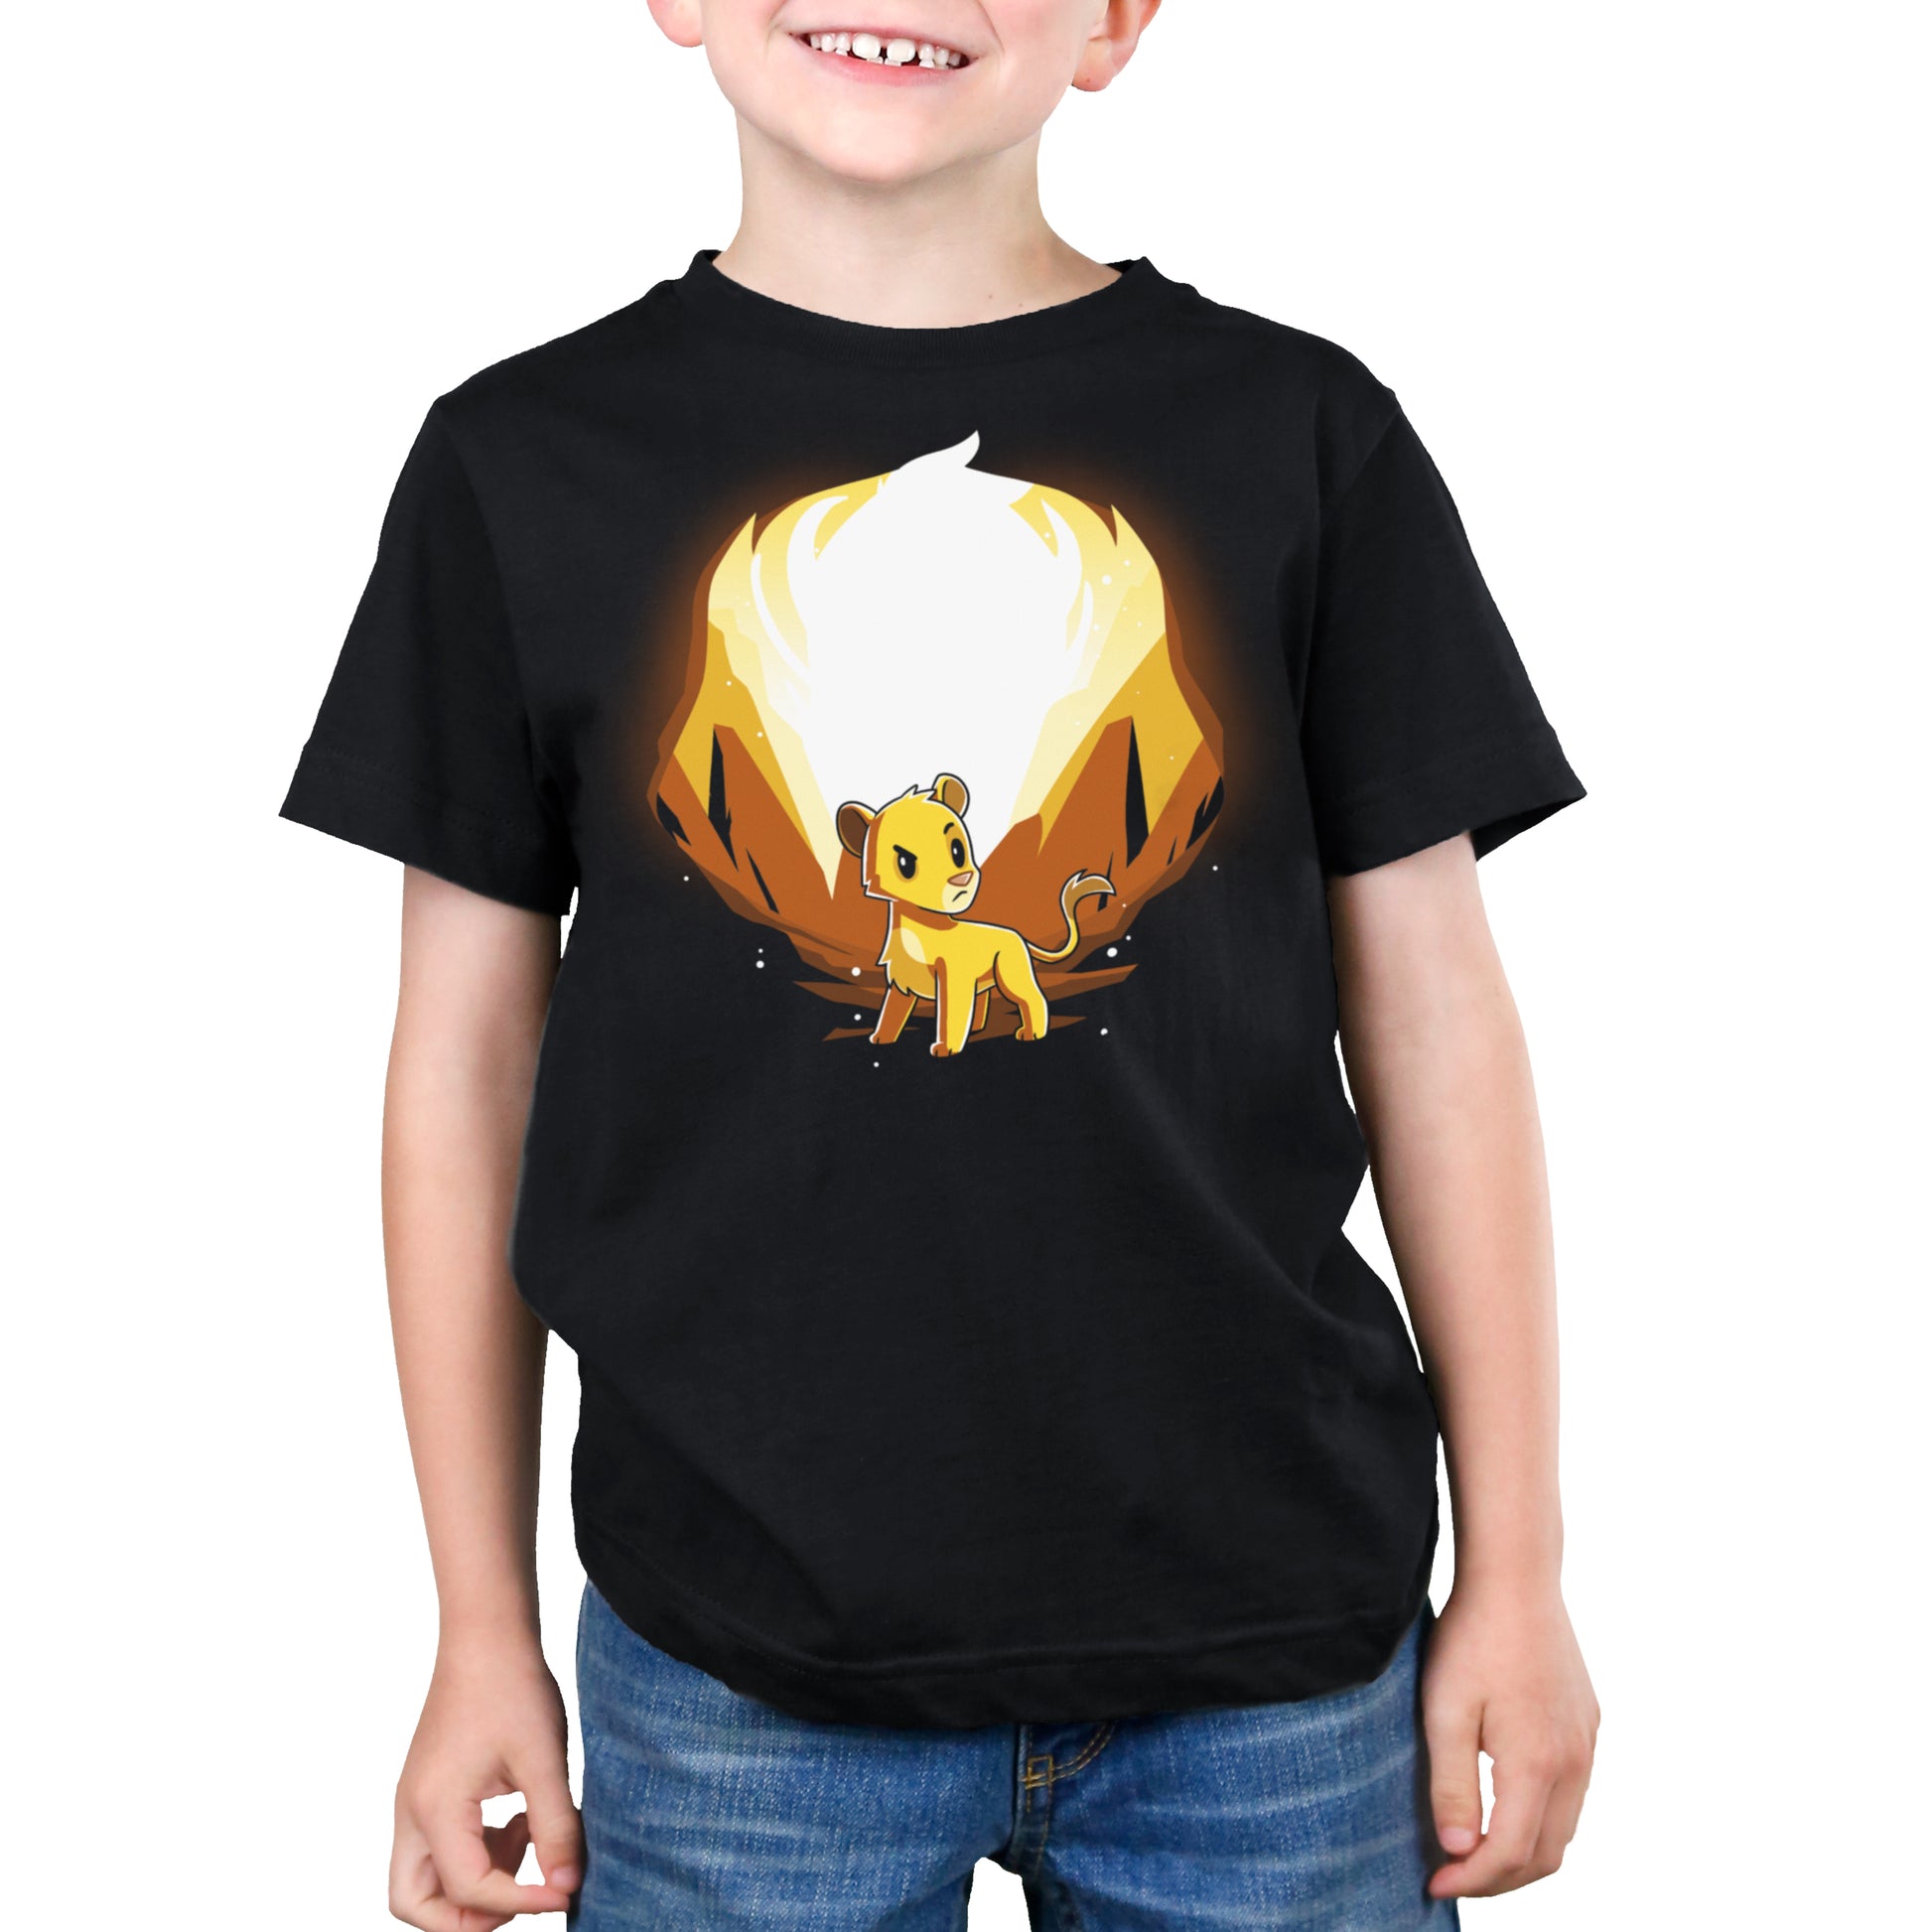 A young boy wearing a black t-shirt with an image of Simba and Scar (Glow), featuring Disney licensed products.